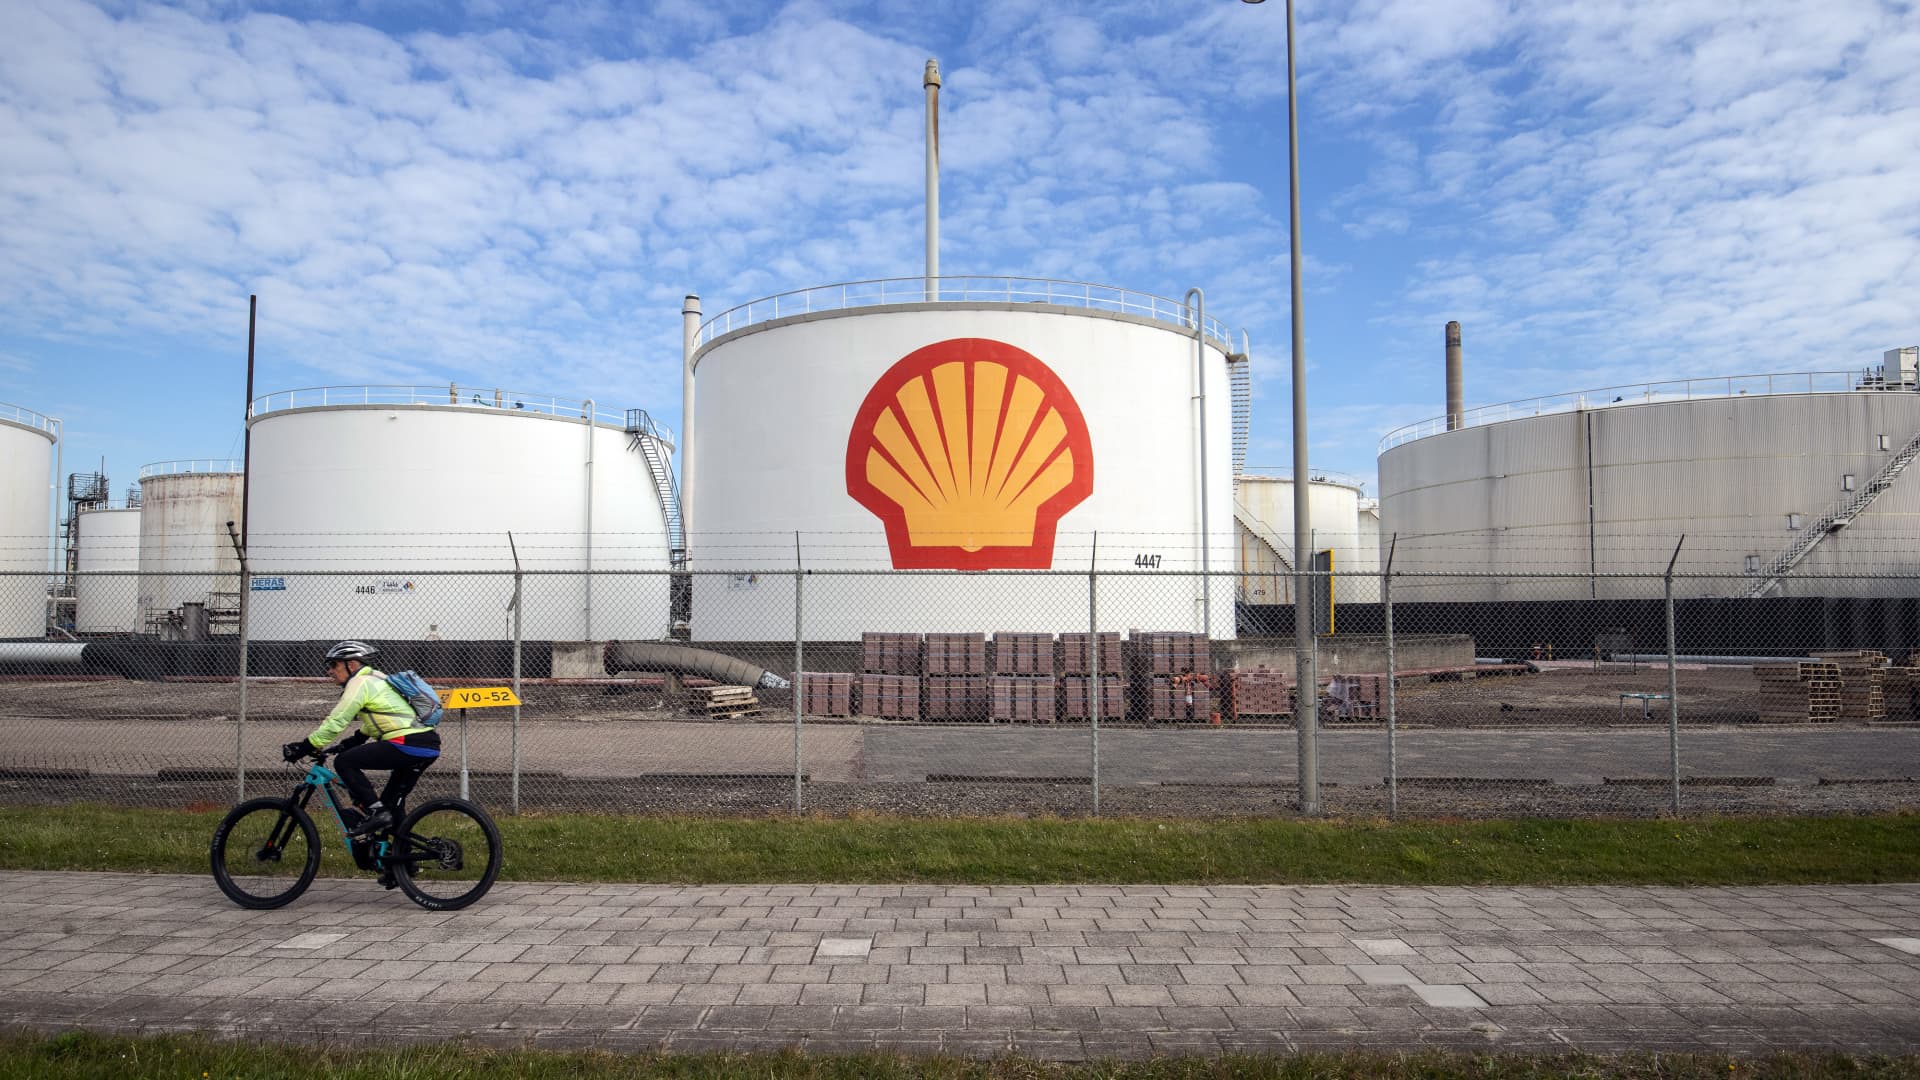 A cyclist passes oil silos at the Royal Dutch Shell Pernis refinery in Rotterdam, Netherlands, on Tuesday, April 27, 2021.